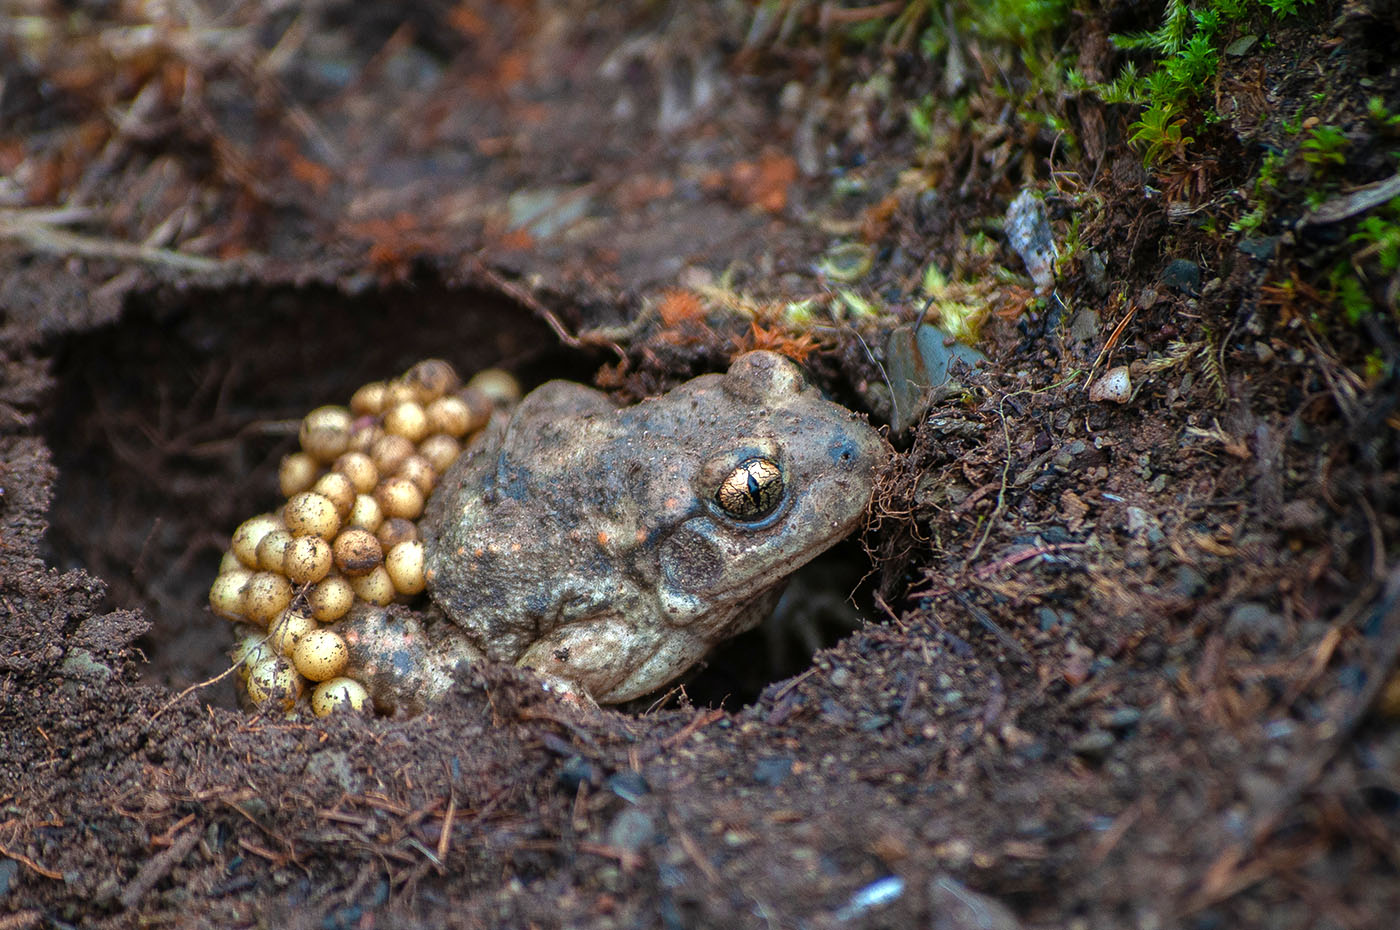 Midwife Toad alytes obstetricans eggs